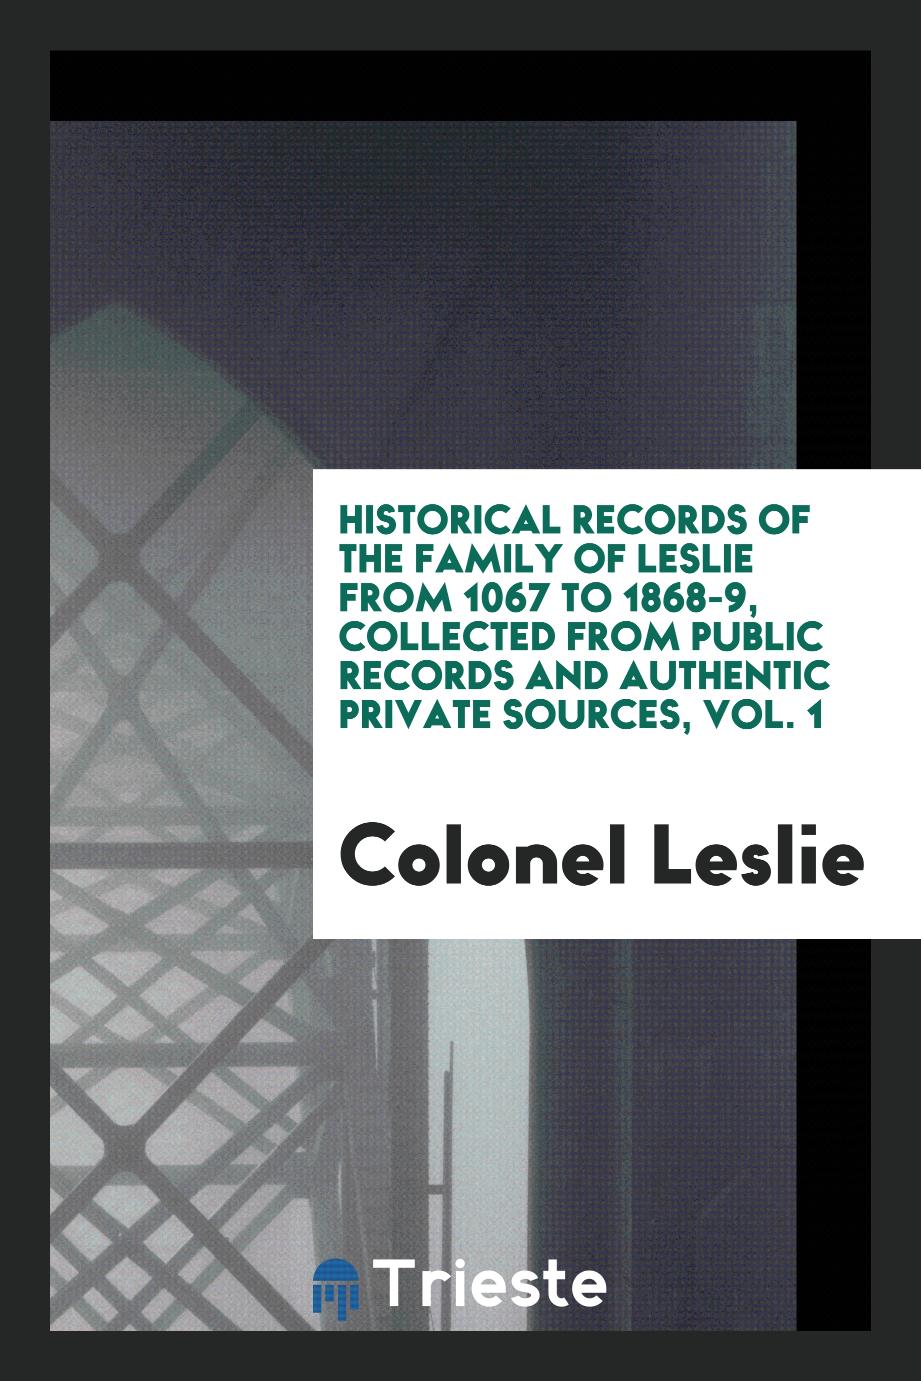 Historical records of the family of Leslie from 1067 to 1868-9, collected from public records and authentic private sources, Vol. 1